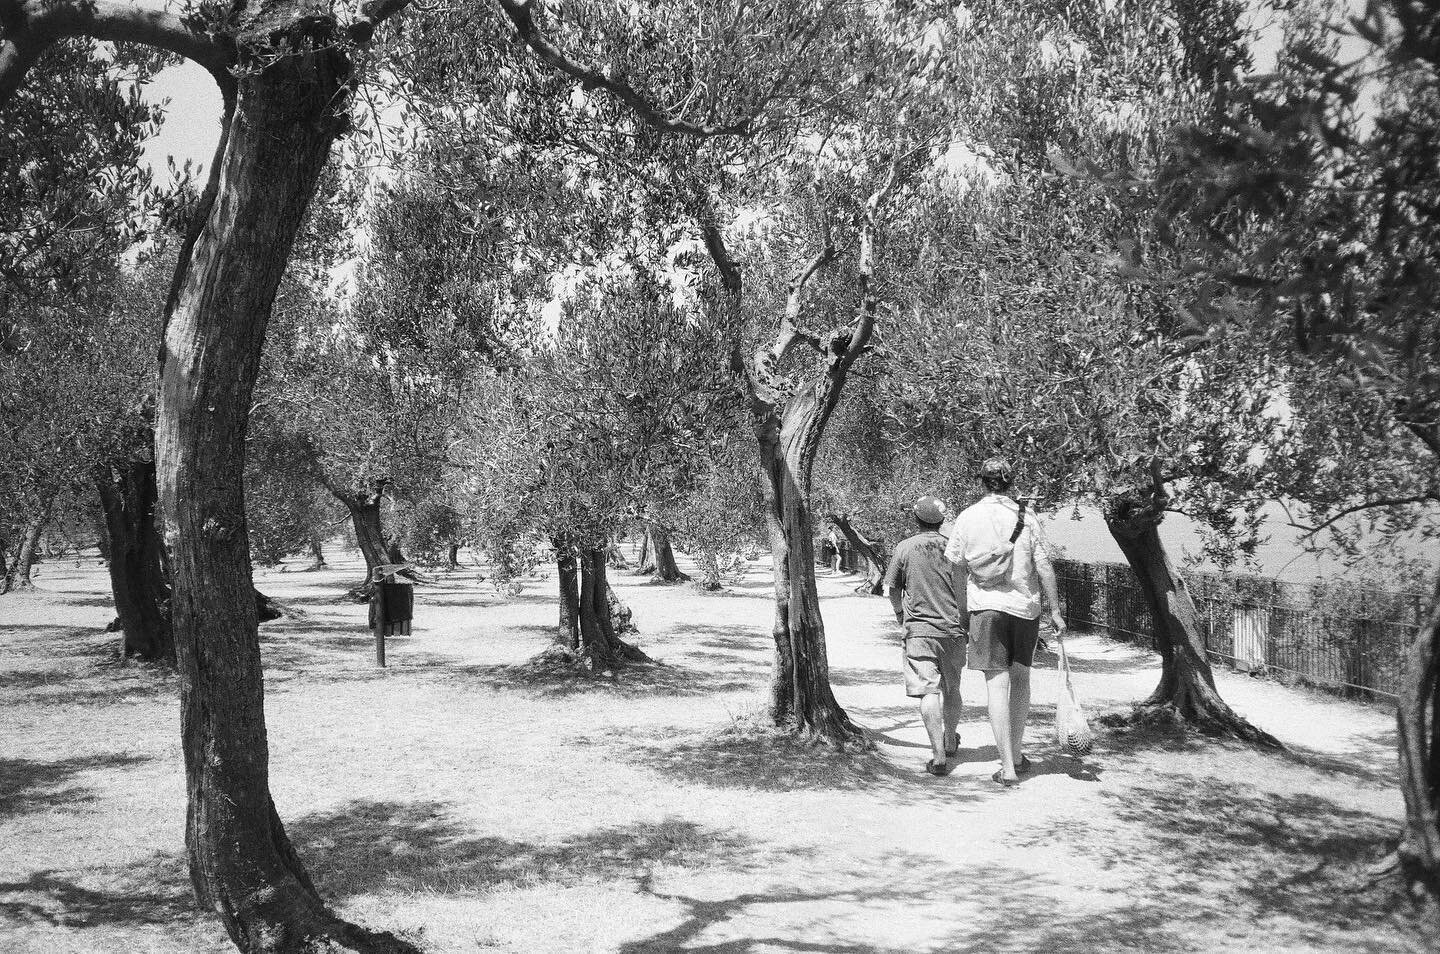 Through the crumbling olive groves of Catullus, walking with dad.

📸 @mairiiiiiii